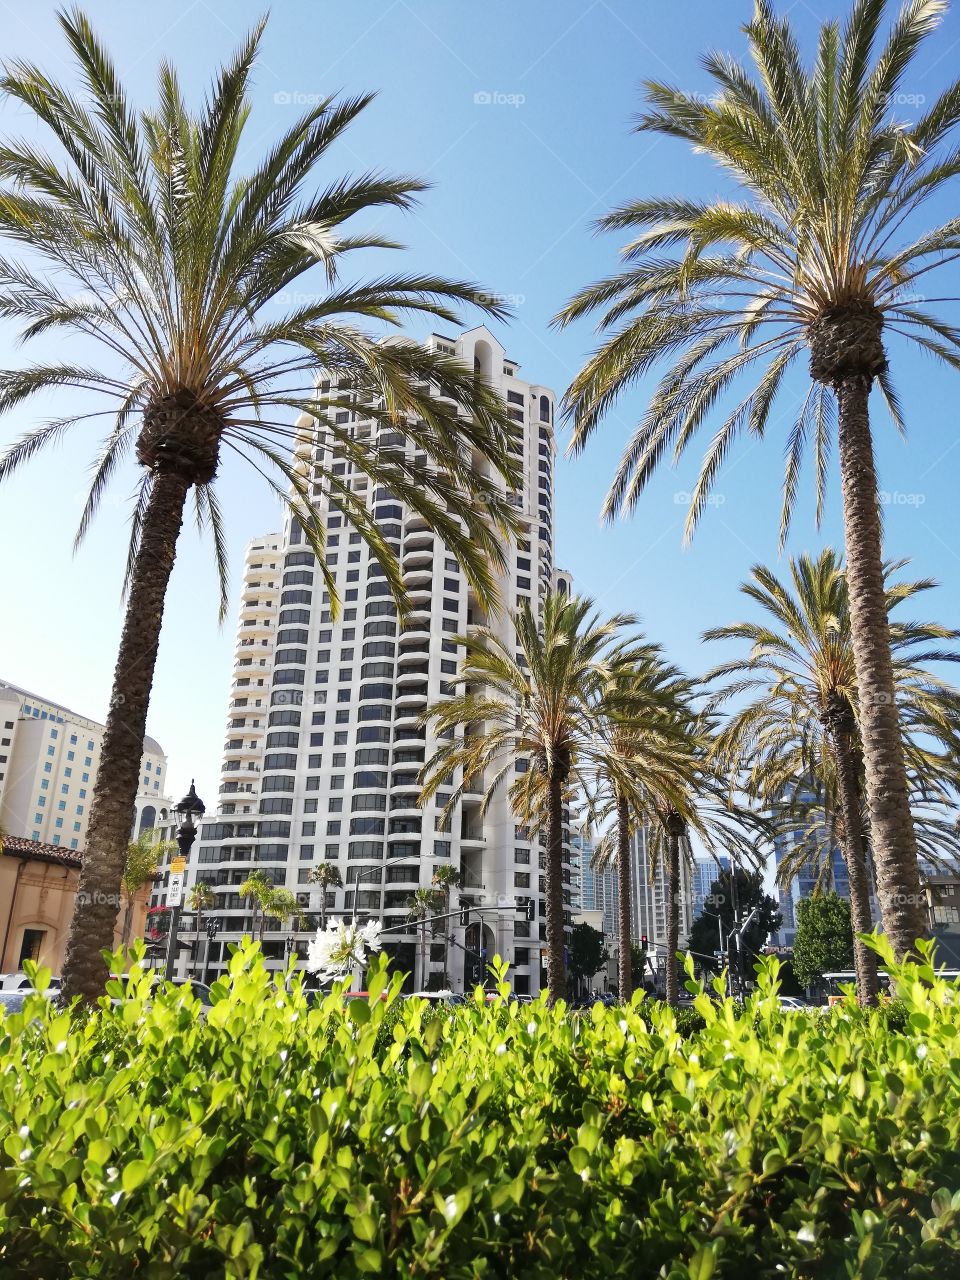 Beautiful, sunny, and shiny evening at San Diego California. Palm trees are the signature of California Republic.